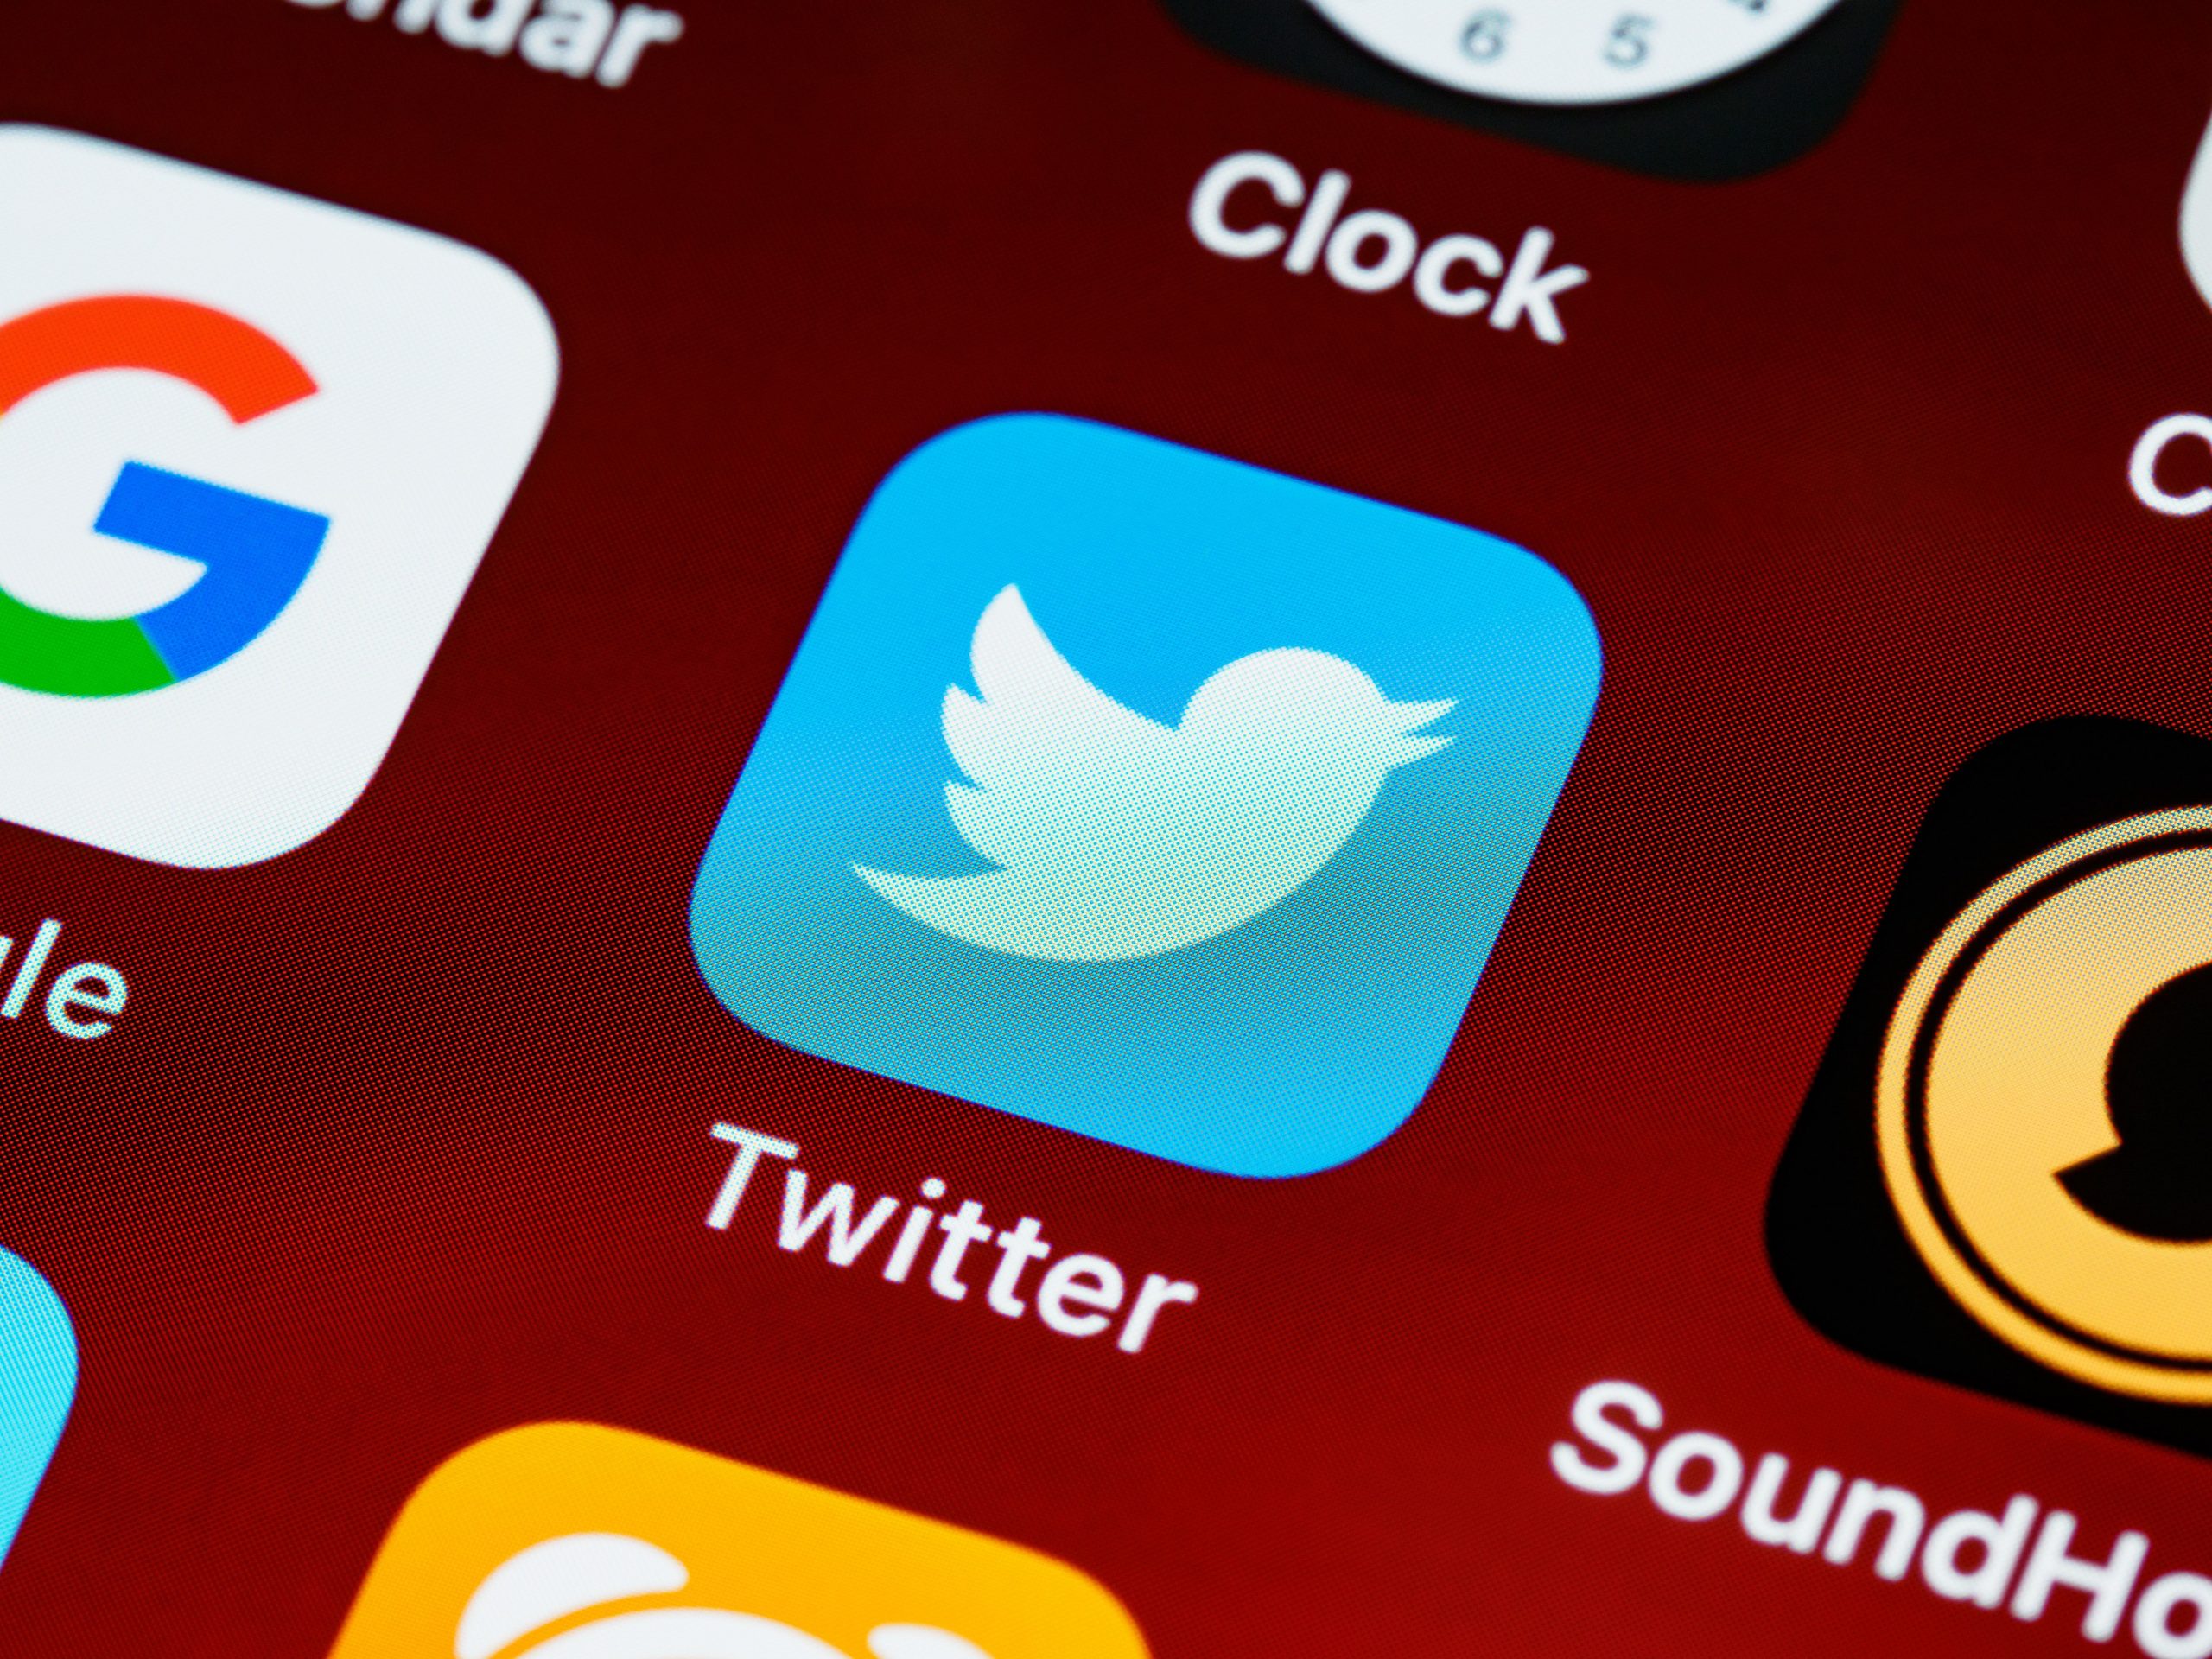 Super Follow: Twitter plans to charge users for special content to increase revenue